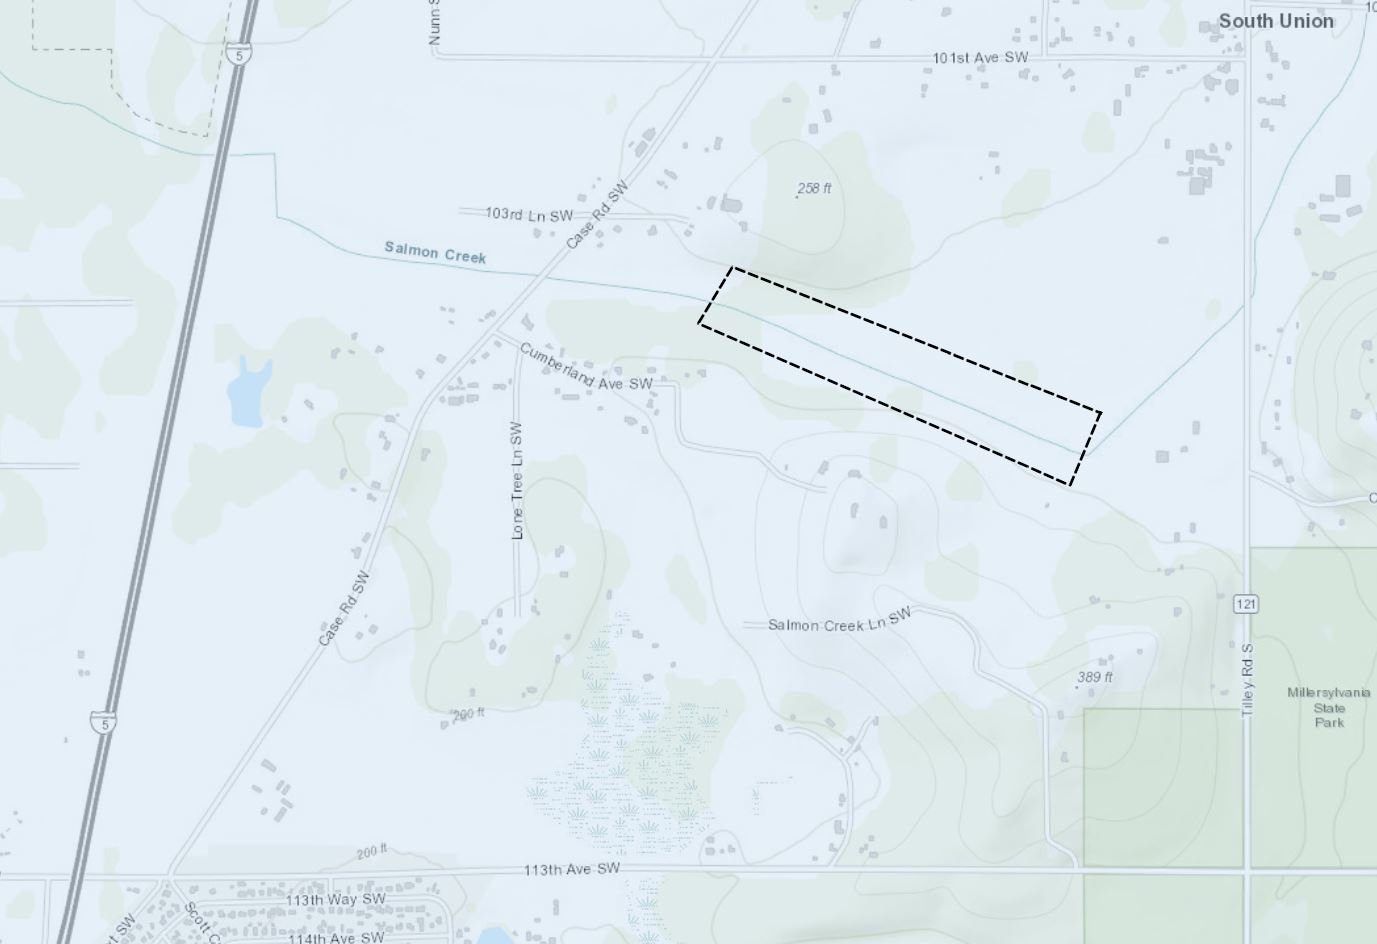 The grass plug that is due to be demolished with explosives, is located somewhere inside the dashed line of this map showing Salmon Creek.